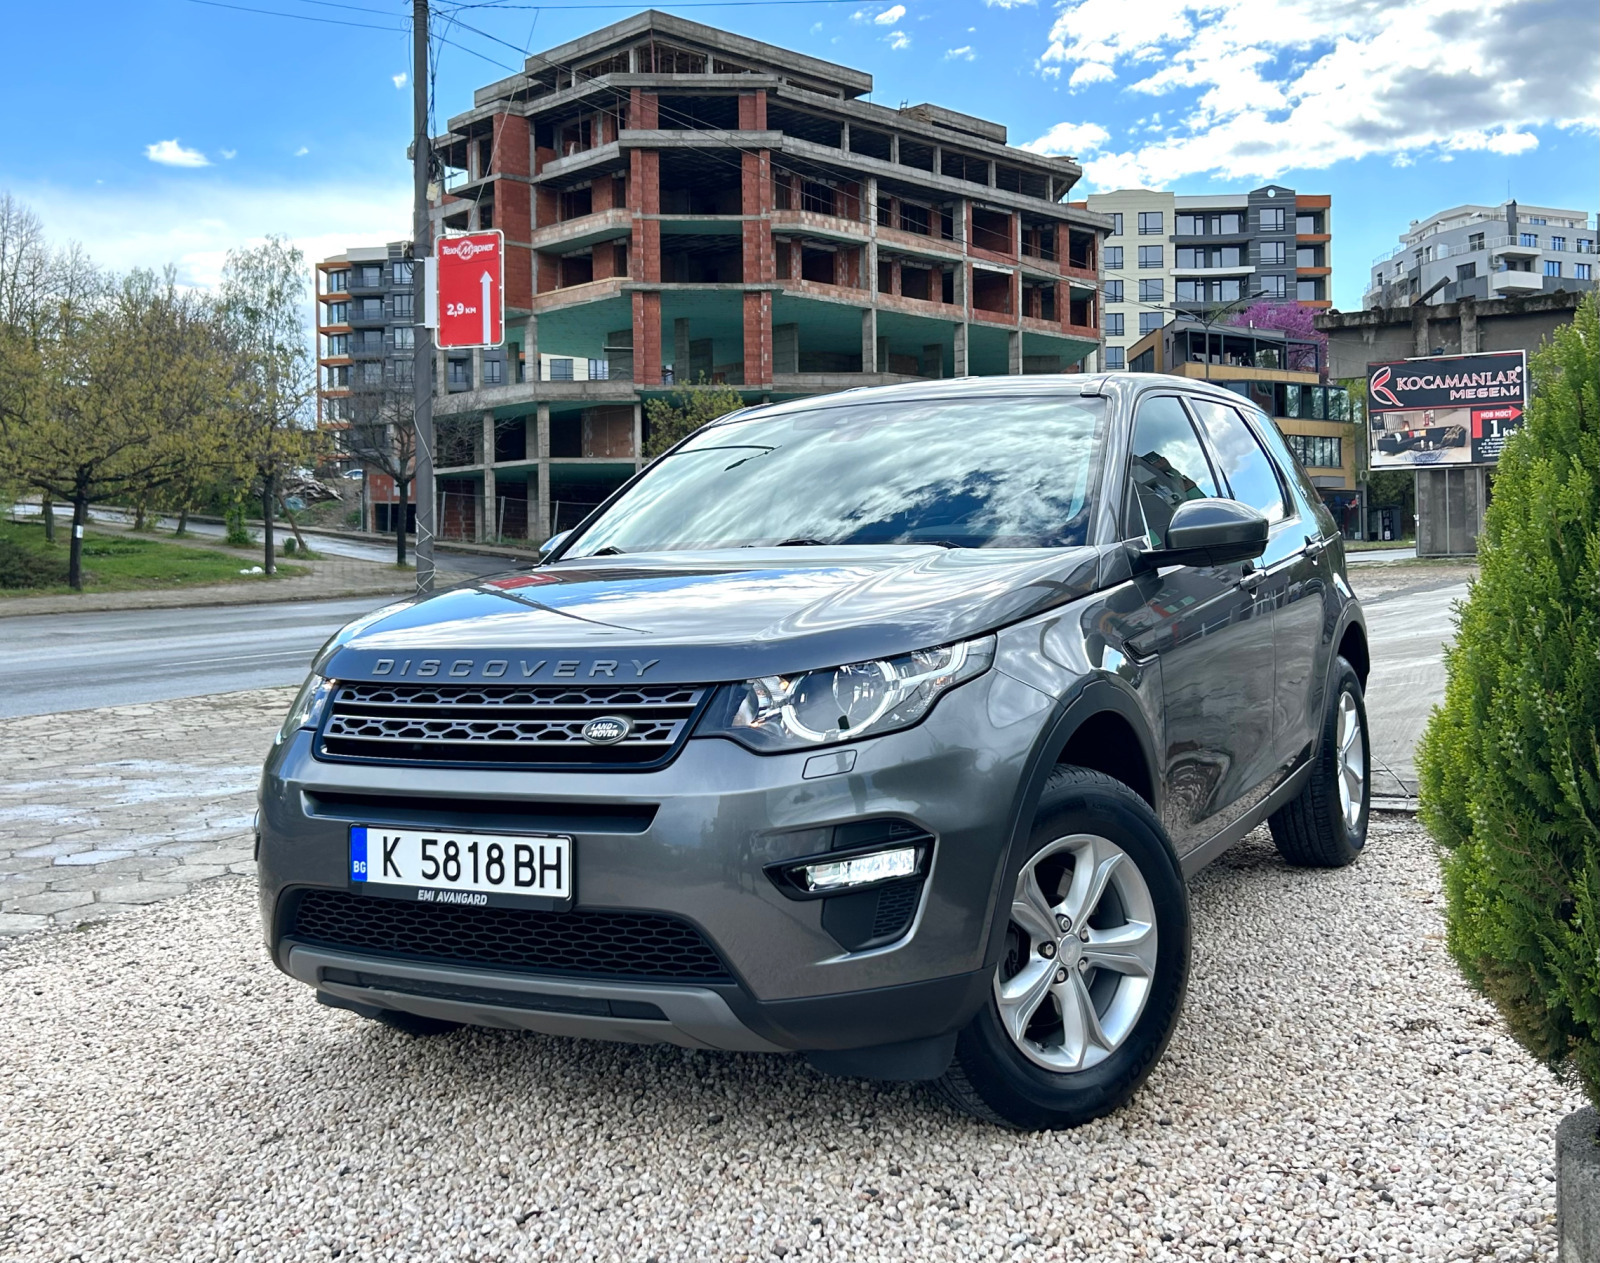 Land Rover Discovery 2.0 TD4 - изображение 1